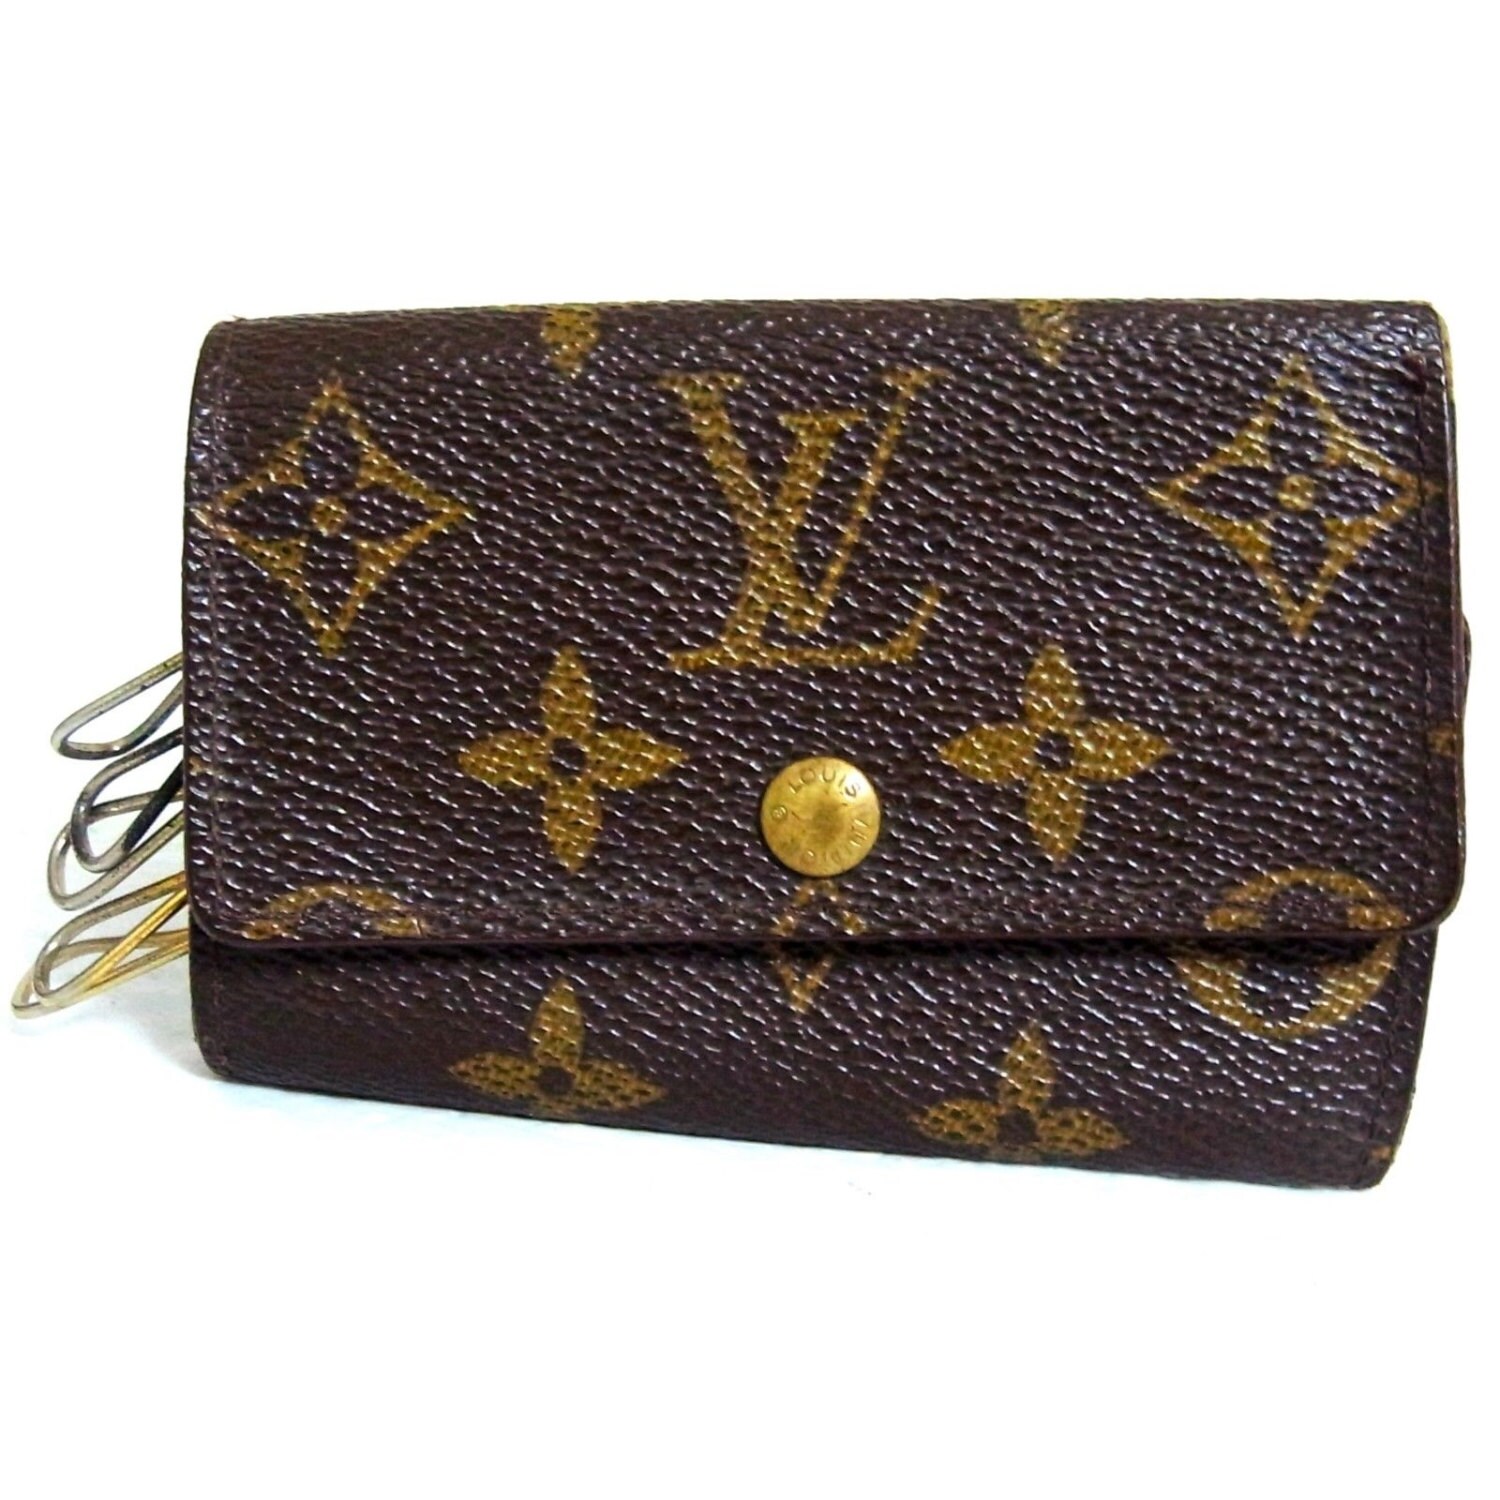 Authentic Vintage 1995 Louis Vuitton Small Brown Monogram Canvas 6 Ring Key Holder Accessory ...